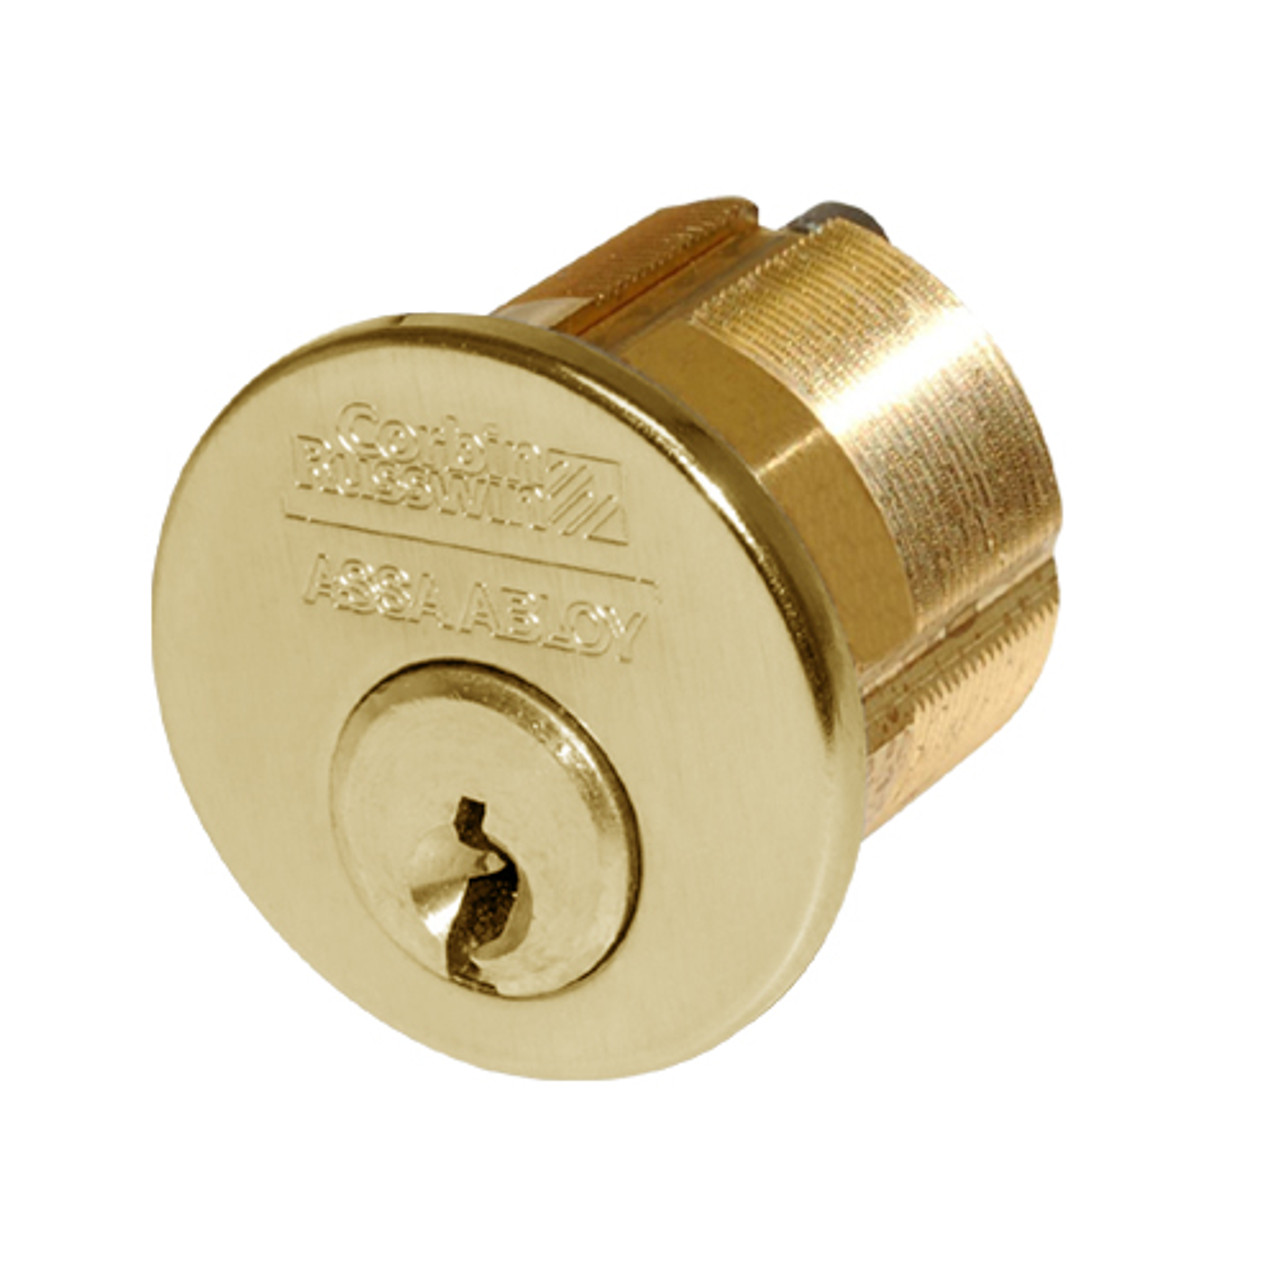 CR1000-138-A06-6-D1-605 Corbin Conventional Mortise Cylinder for Mortise Lock and DL3000 Deadlocks with Schlage L9000 Cam in Bright Brass Finish